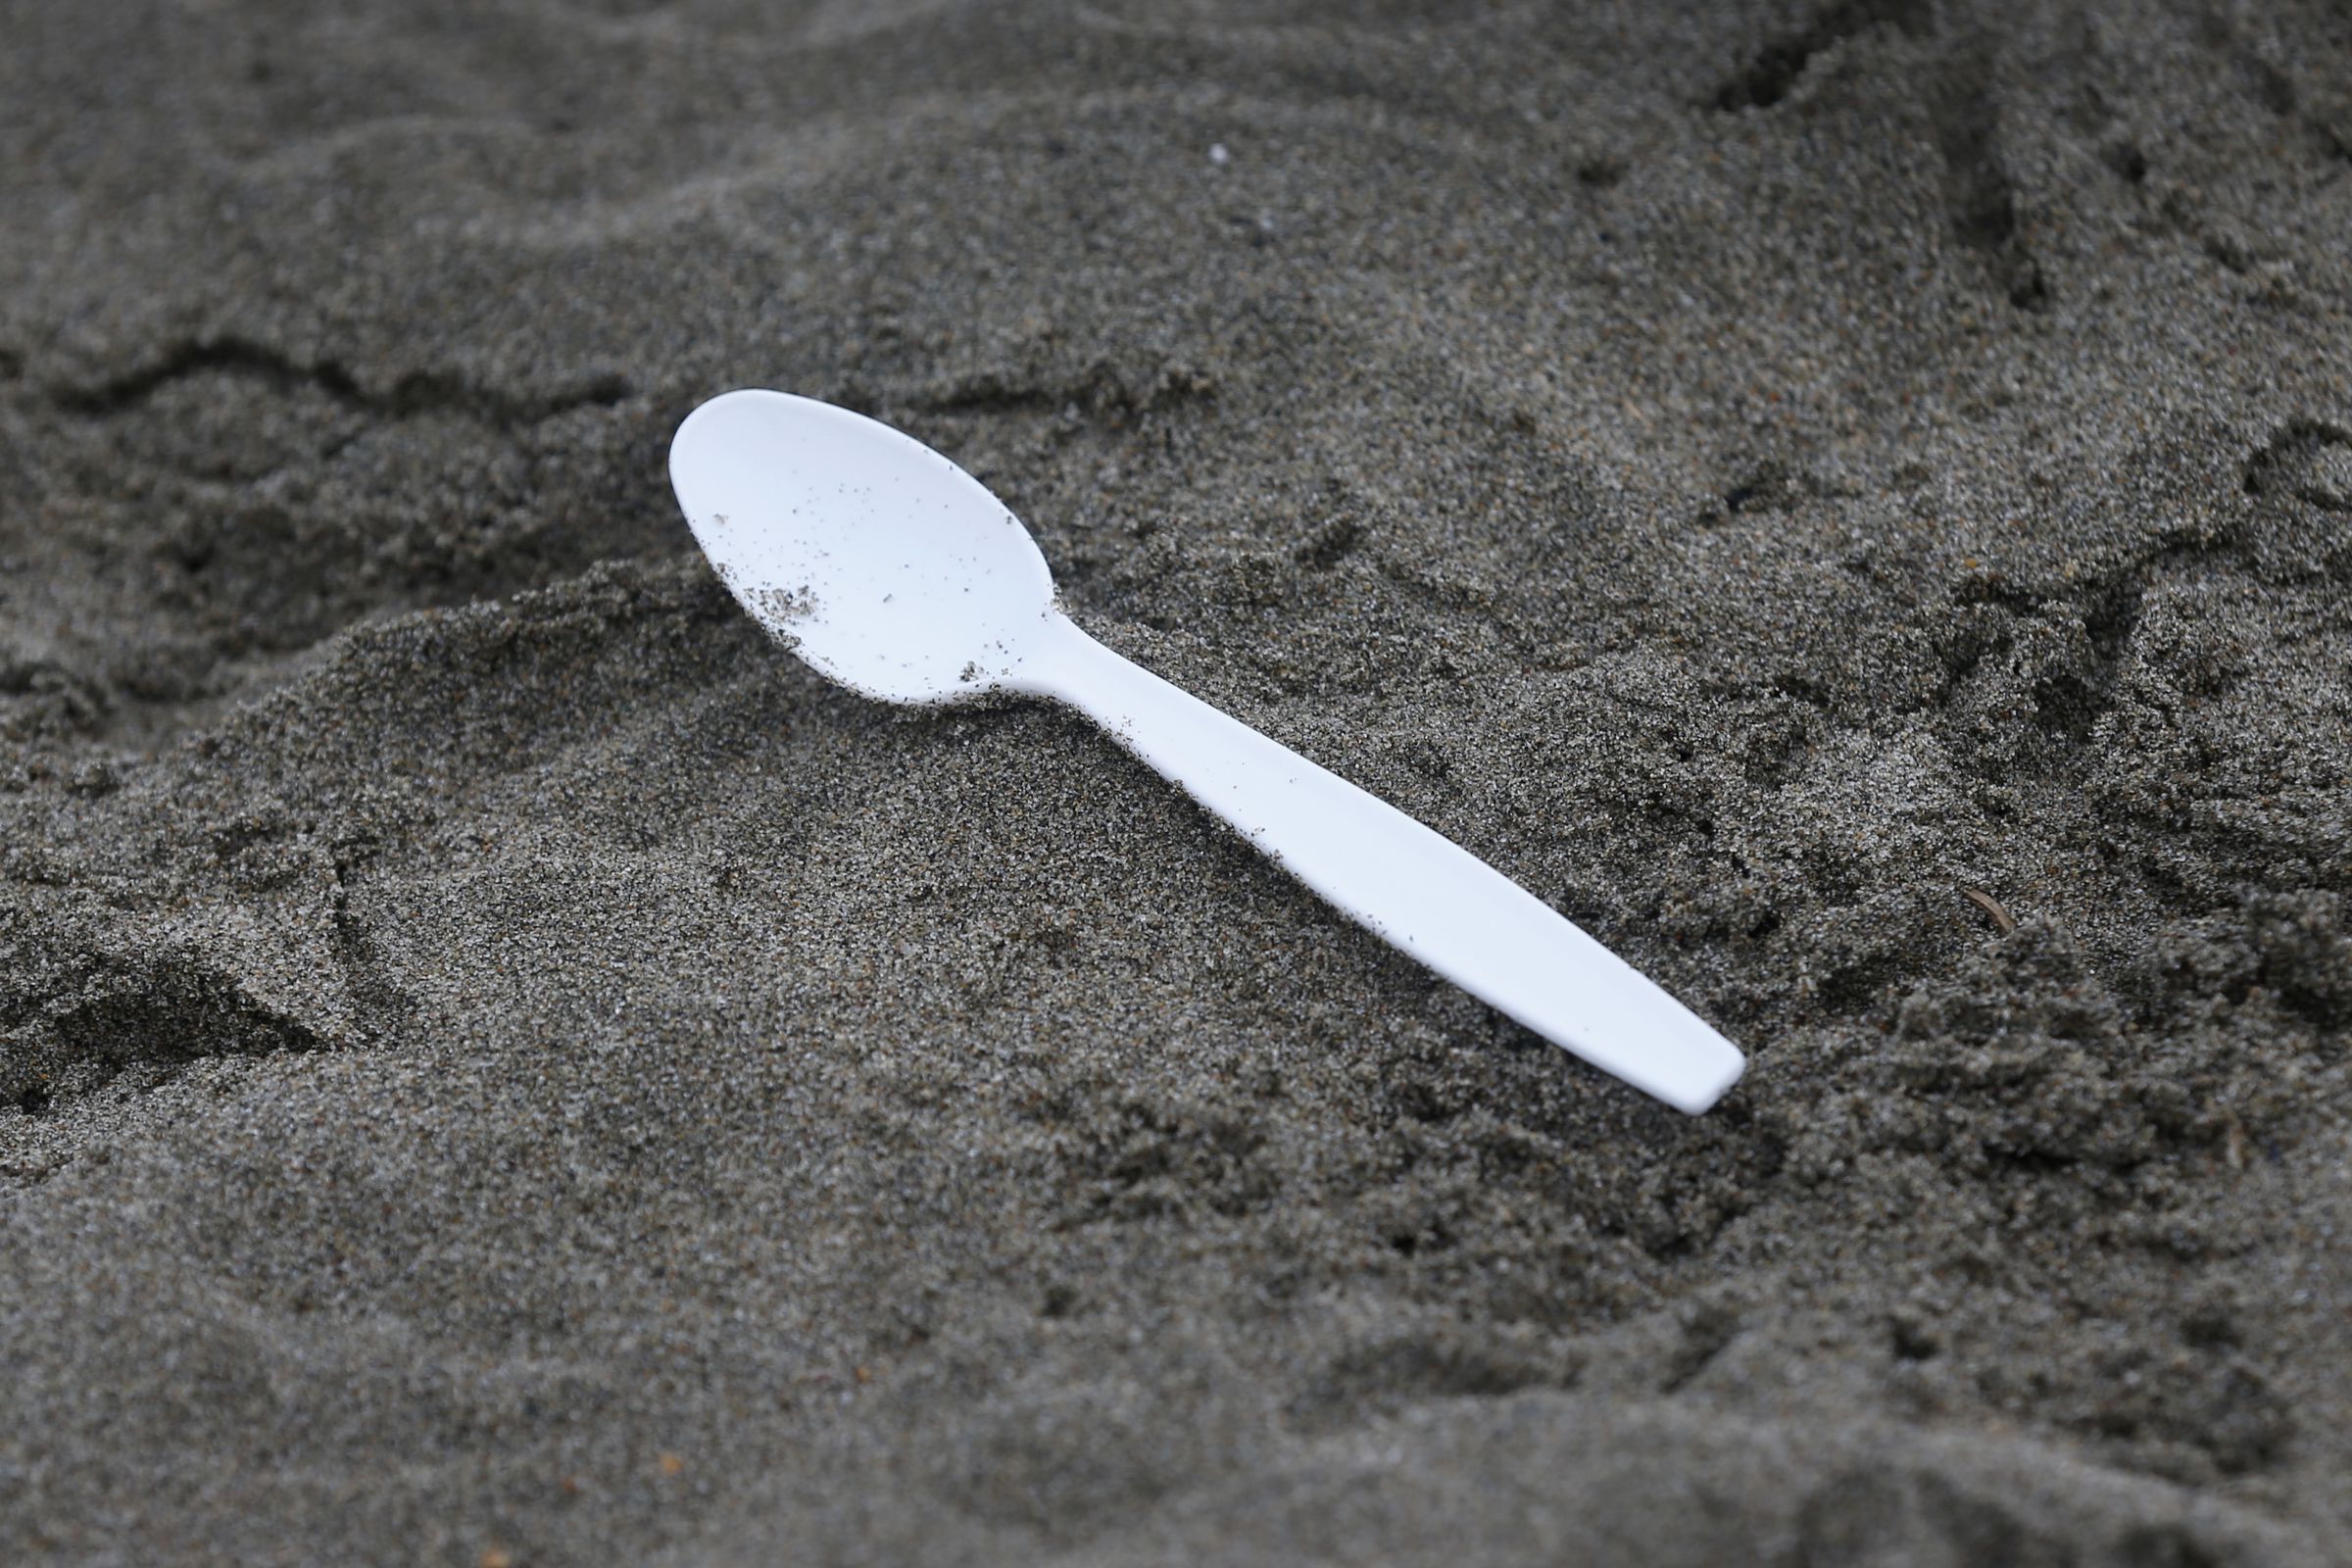 England’s banning plastic plates and cutlery later this year